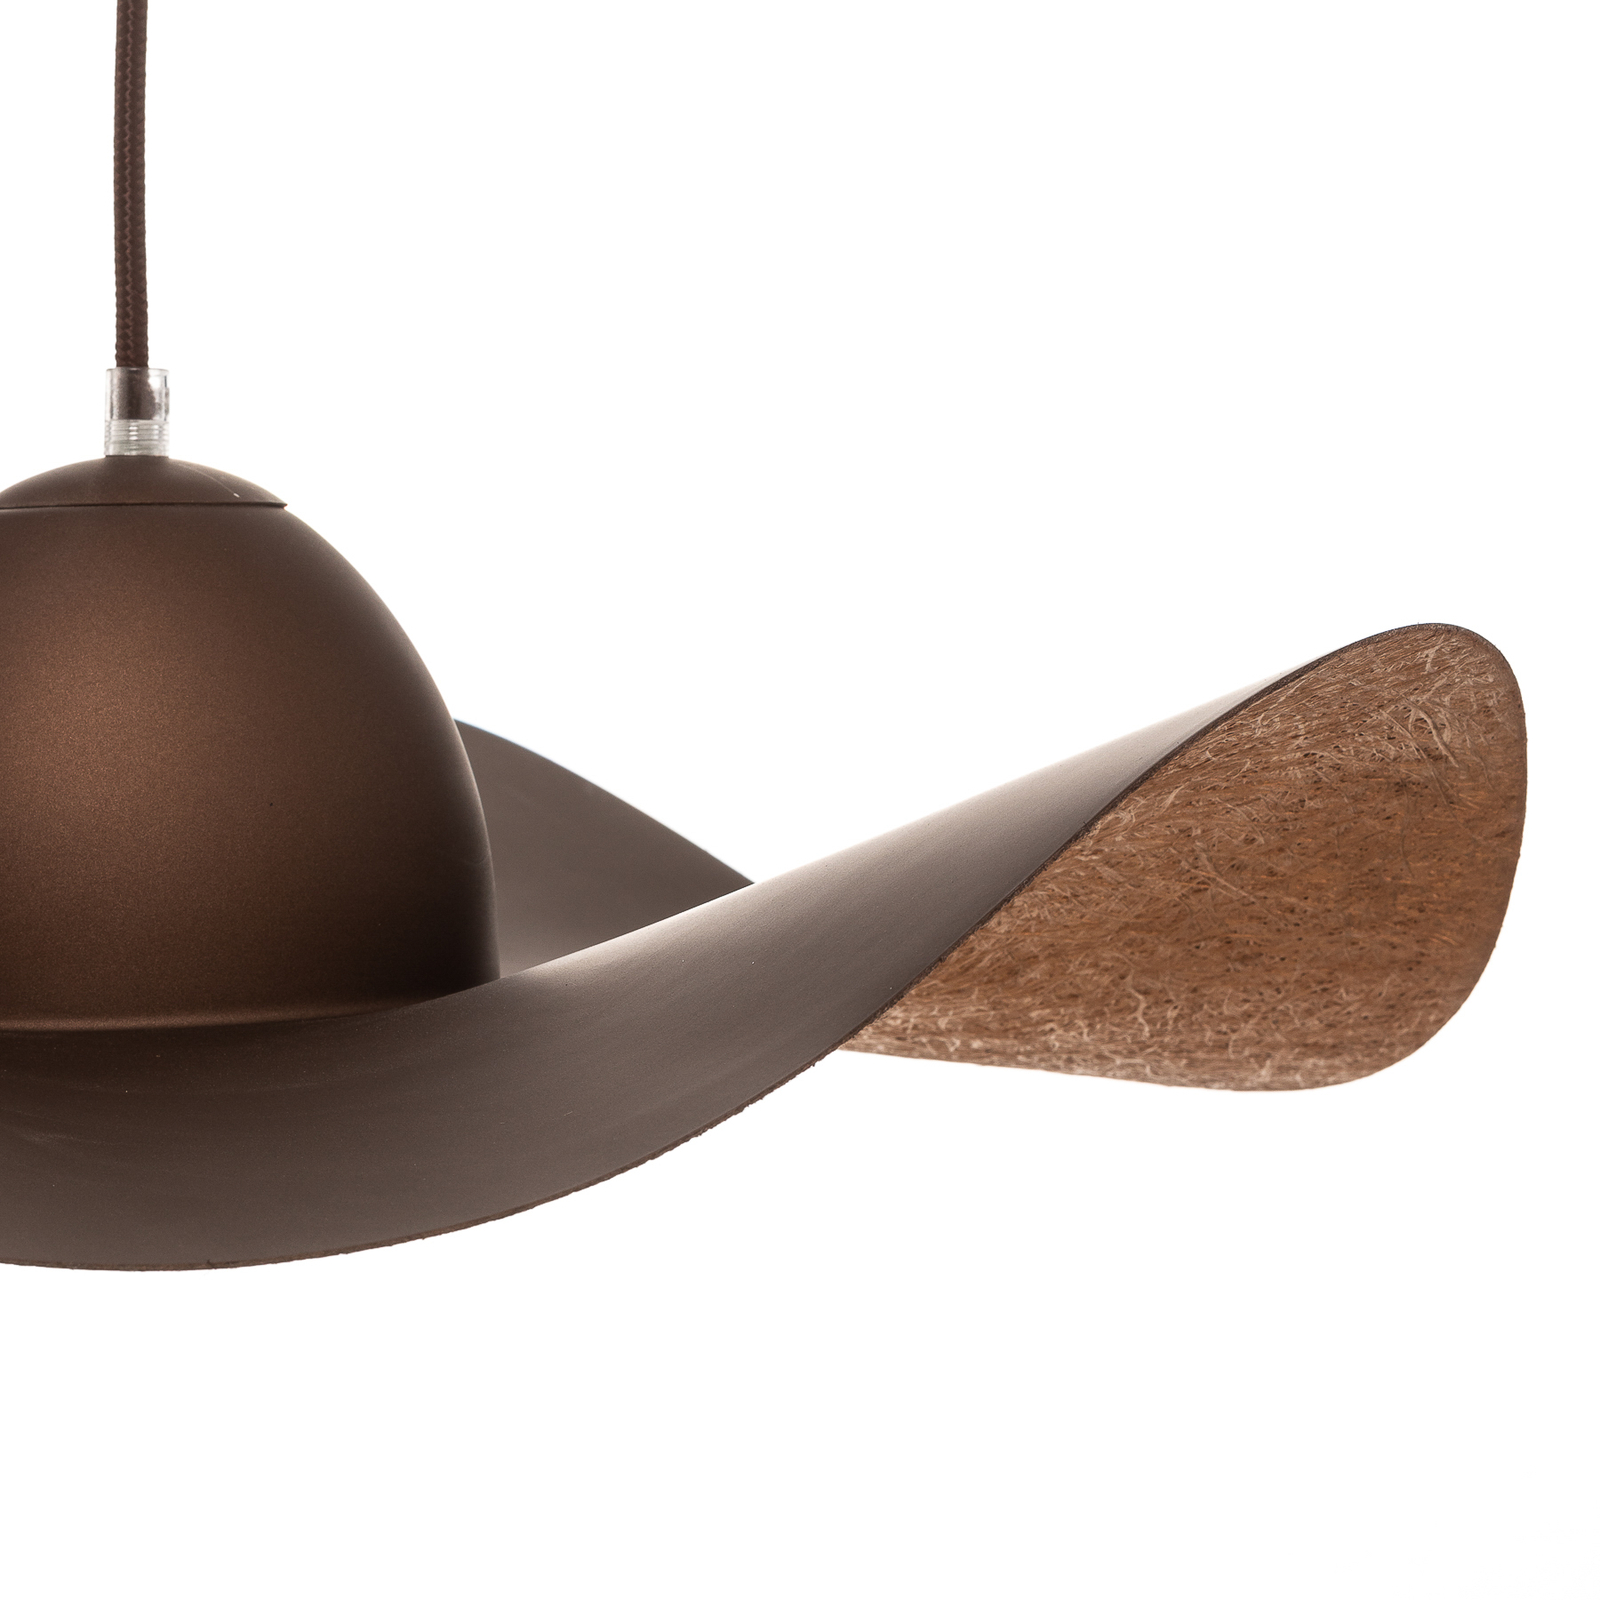 Jil pendant light, curved lampshade, brown/copper